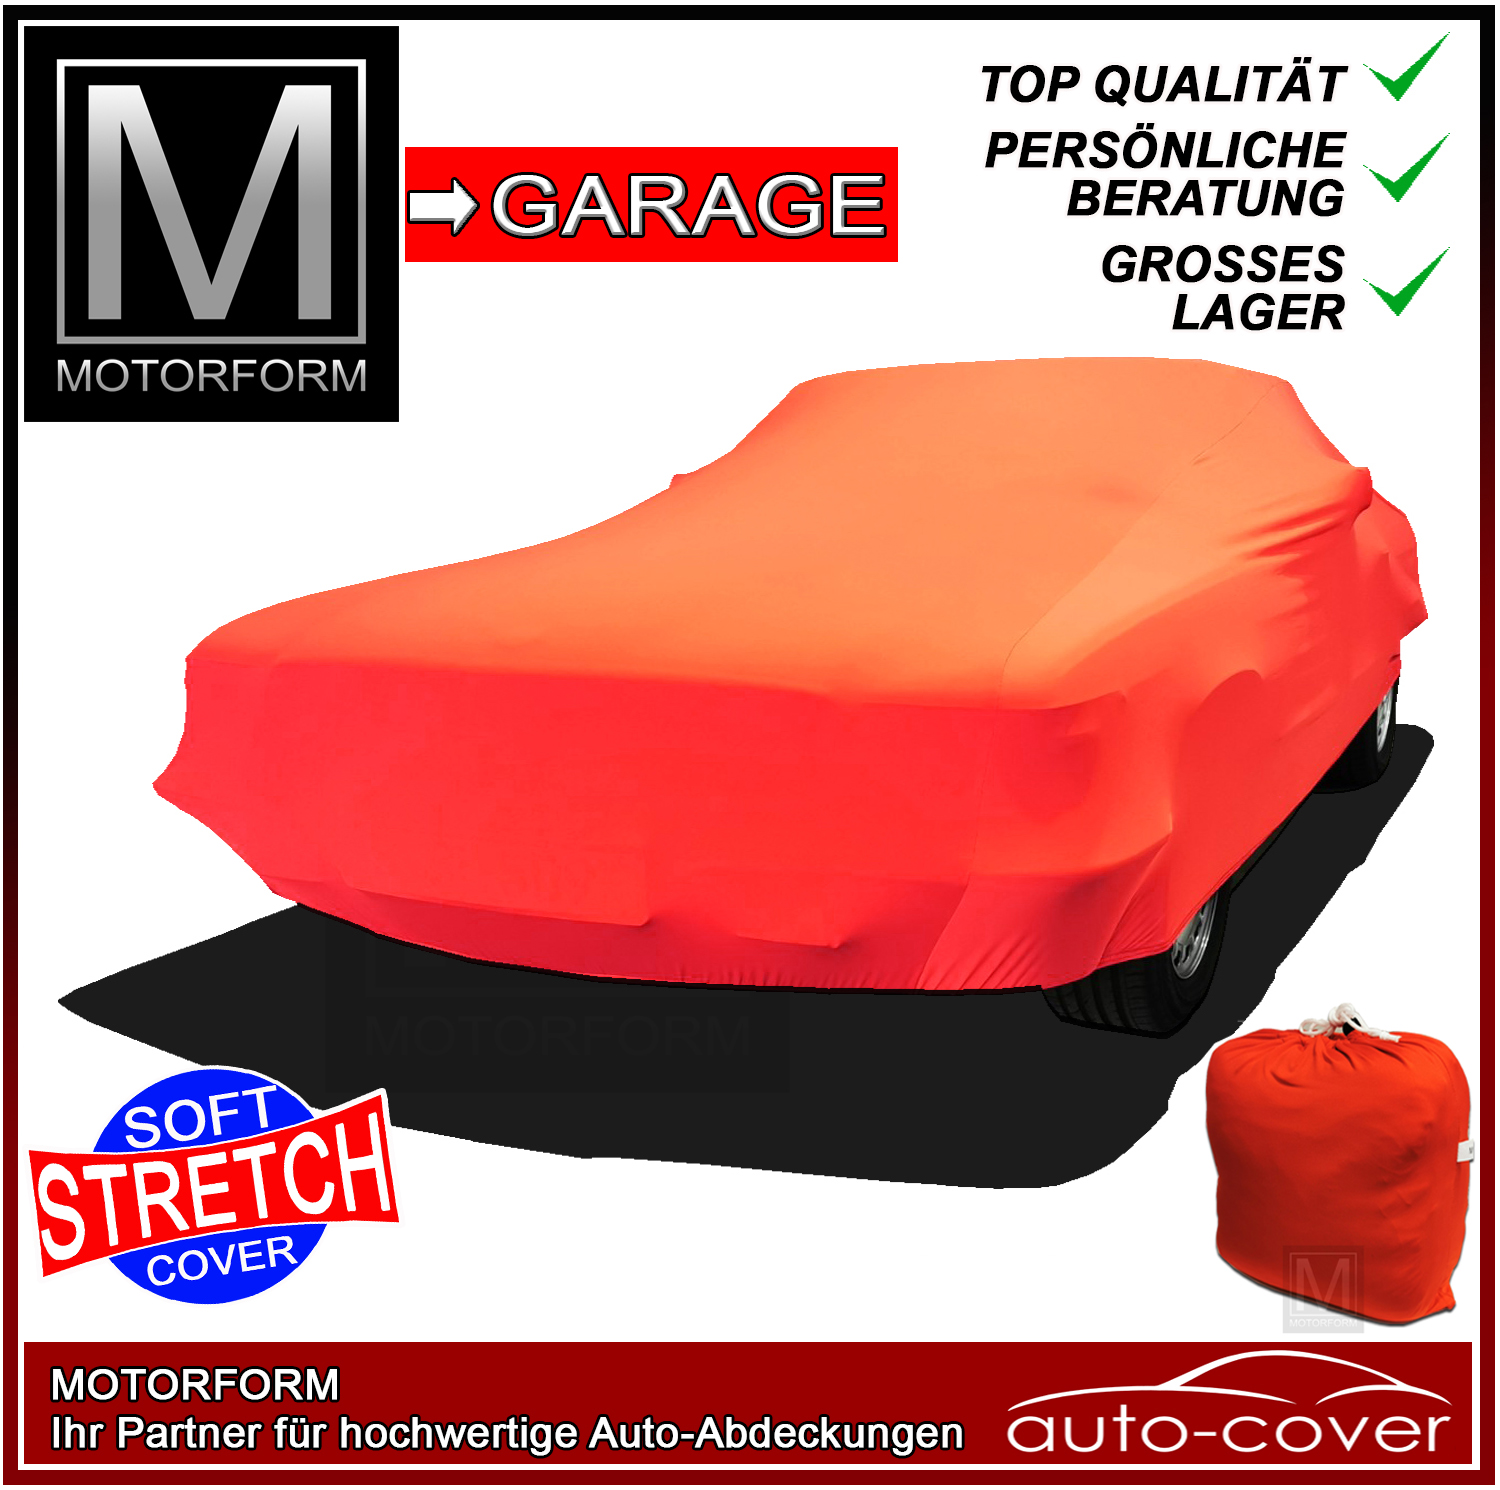 Super Stretchy Cover for Lotus Exige S & 350 (2006-)